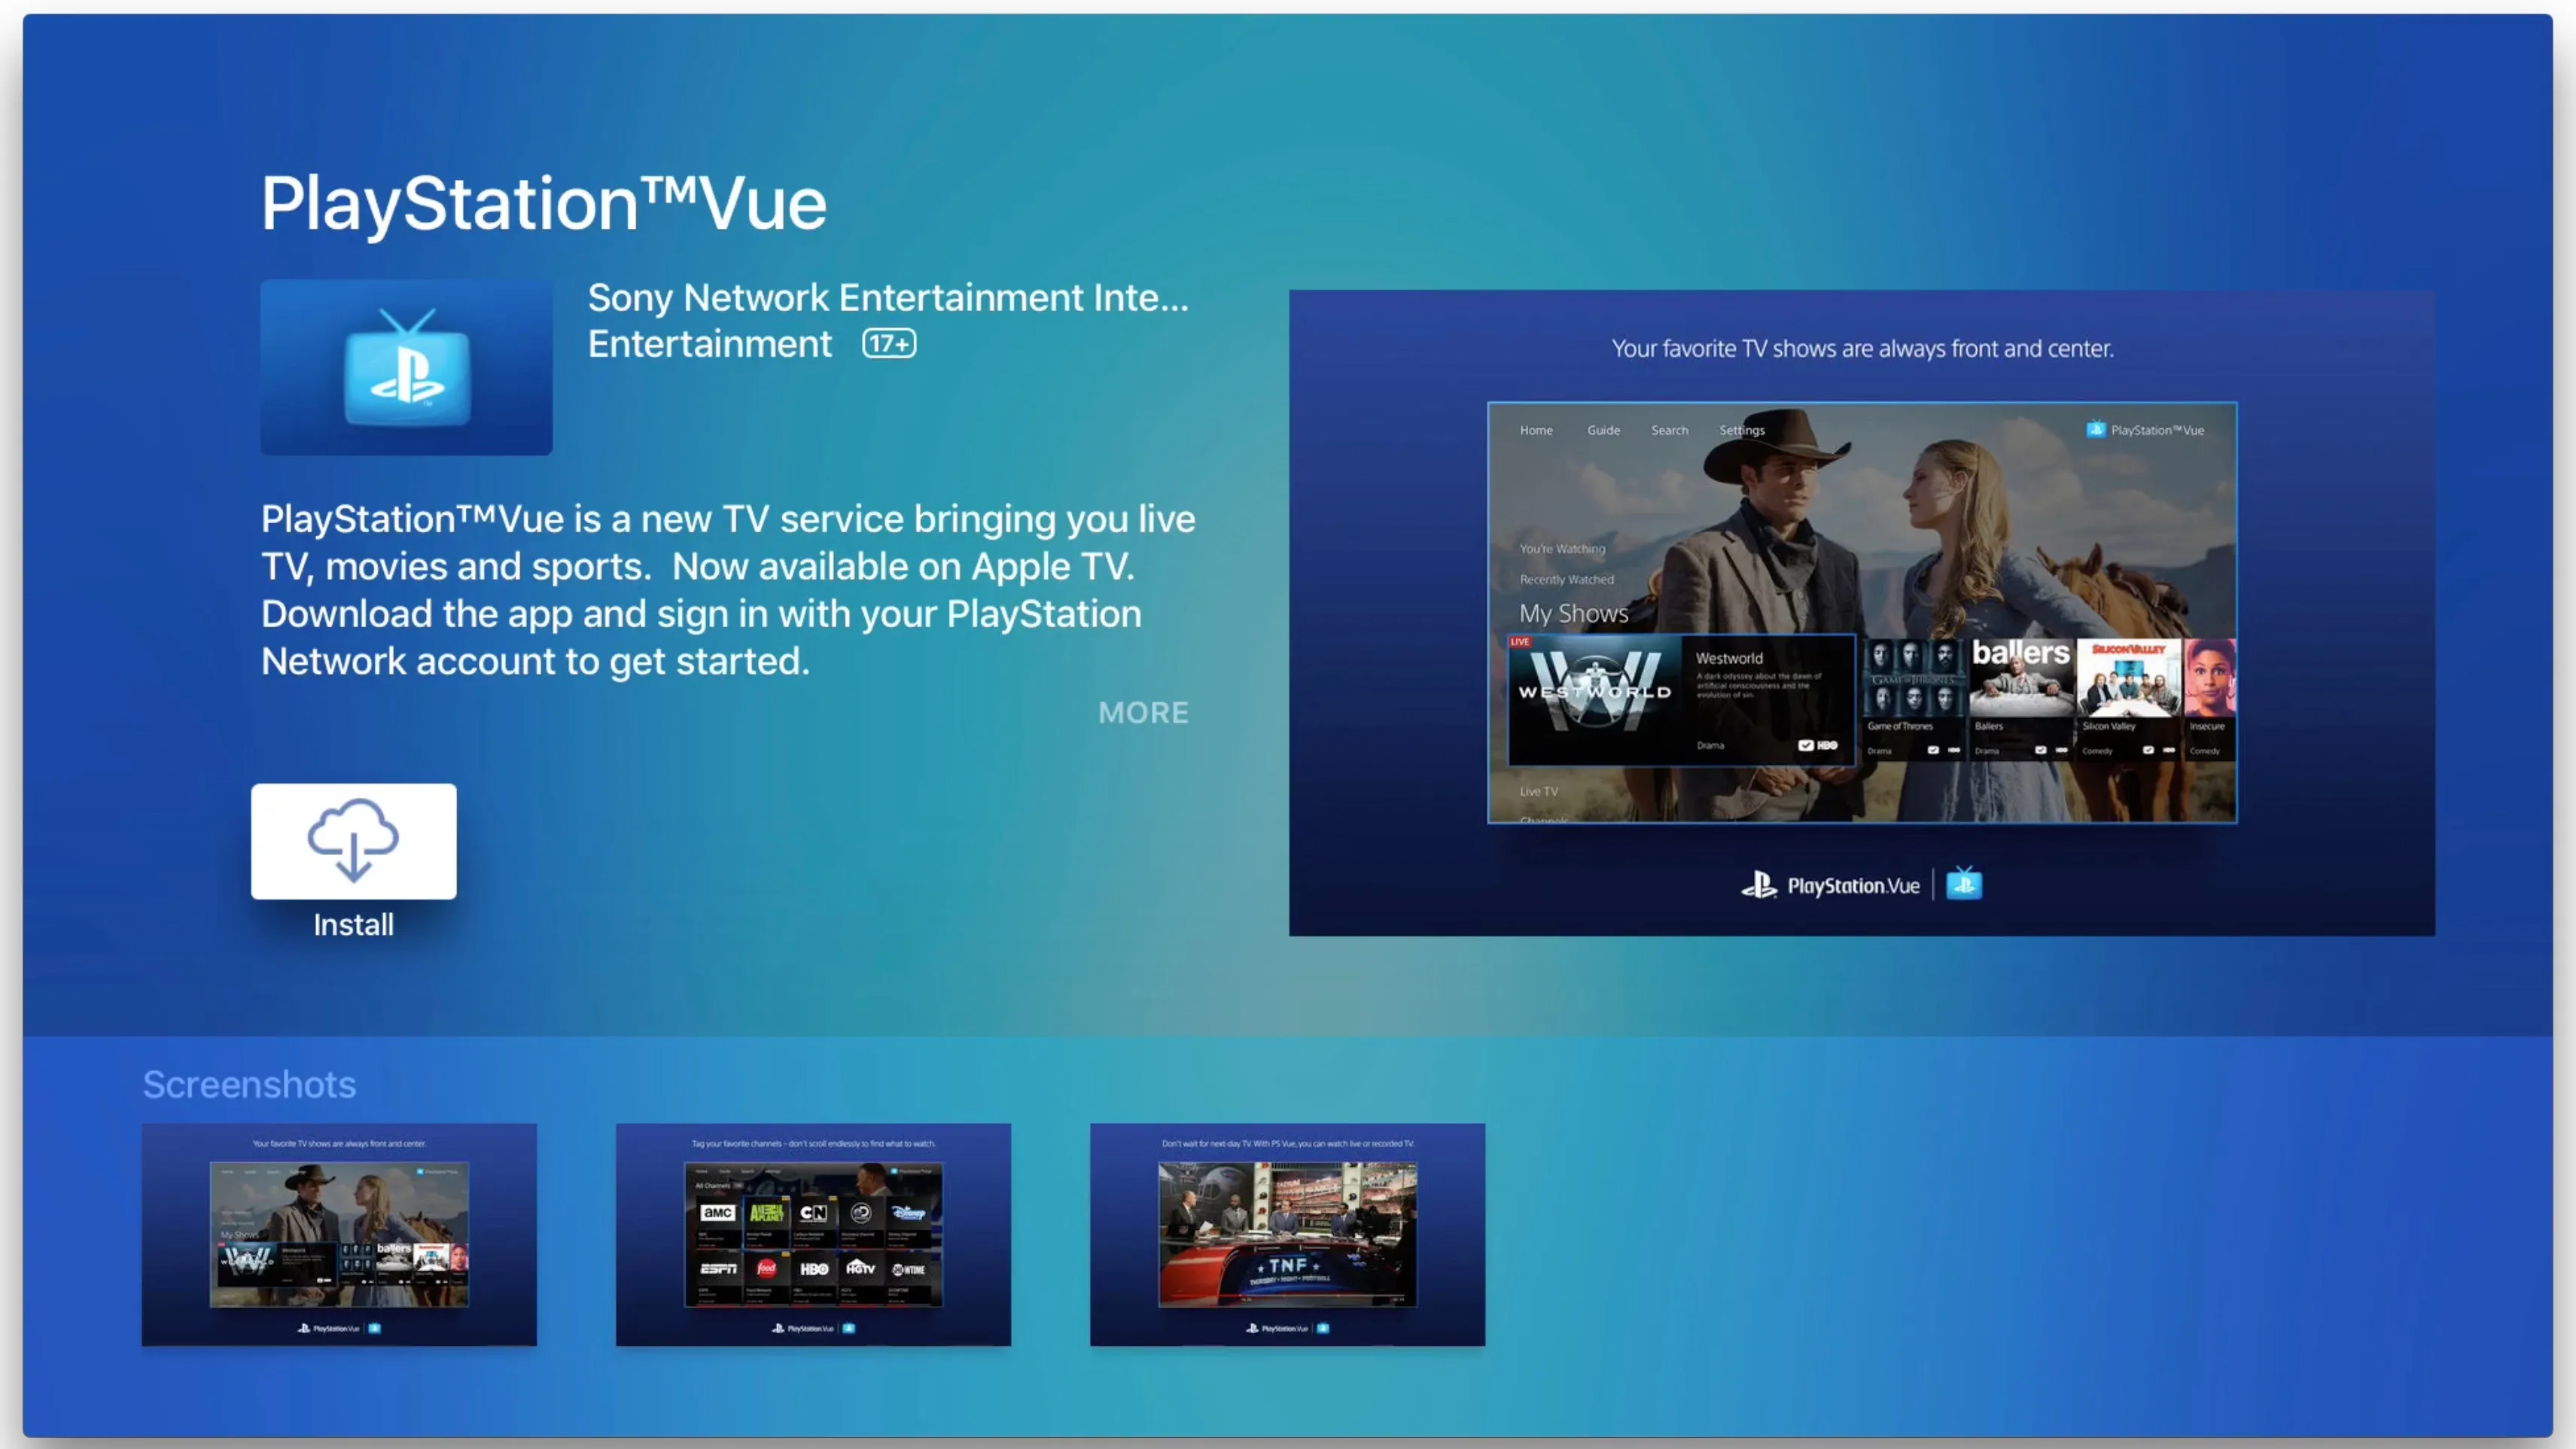 How To Use DVR On Playstation Vue